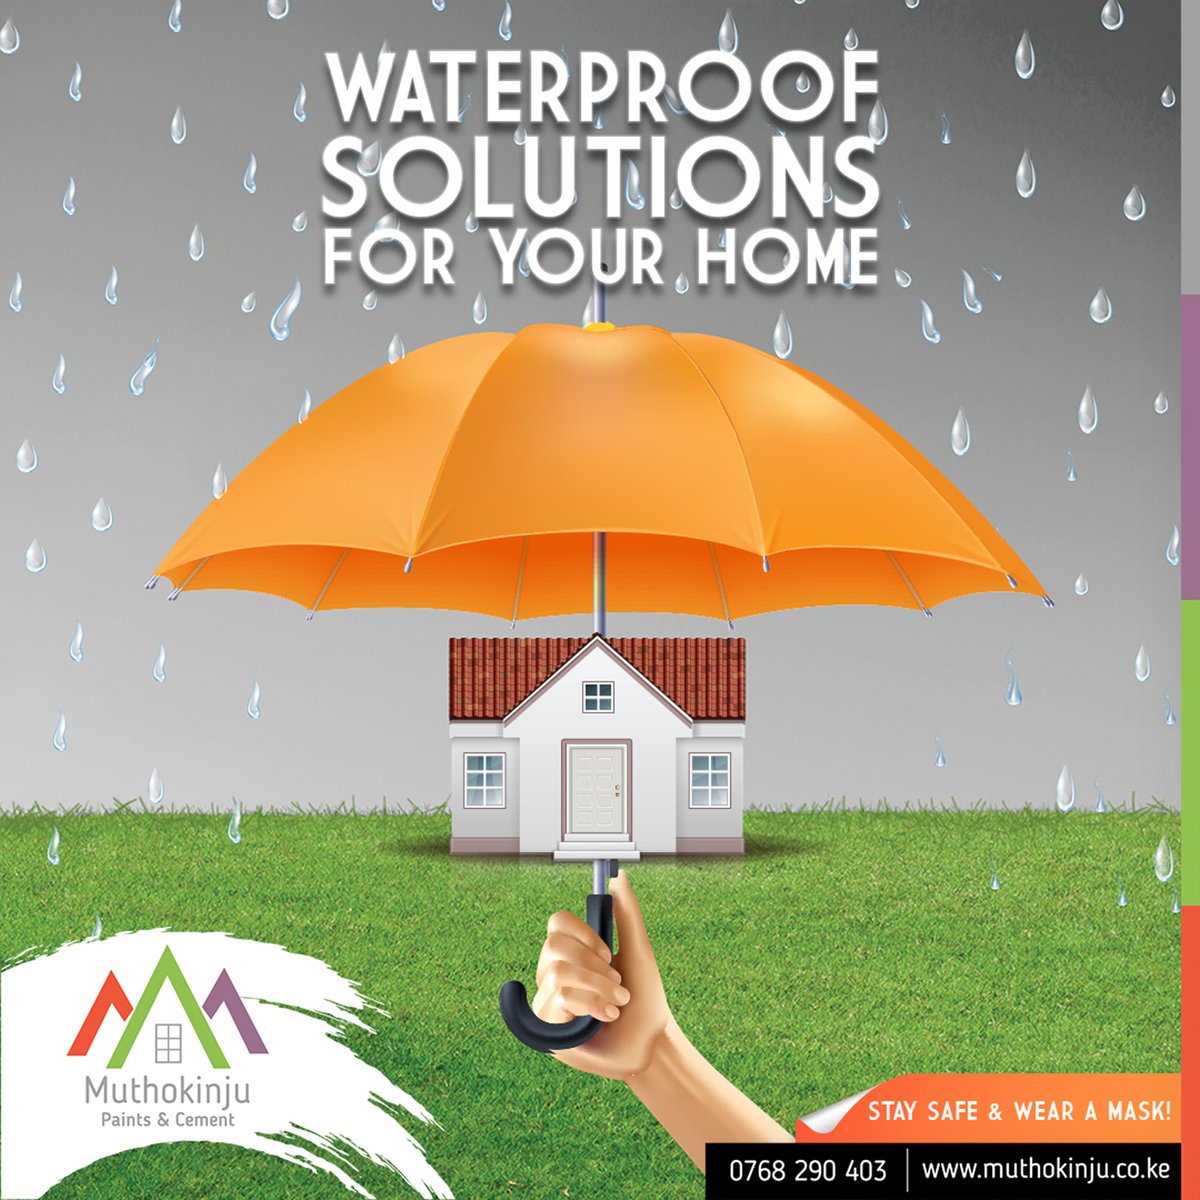 Now that the long rains have begun, protect your home from water damage!☔

At Muthokinju we offer you full-proof expertise & solutions to waterproof your home.

#WaterproofSolutions #ProtectYourHomeWithMuthokinju  #MuthokinjuPaintsAndCement #LiveAColourfulLife